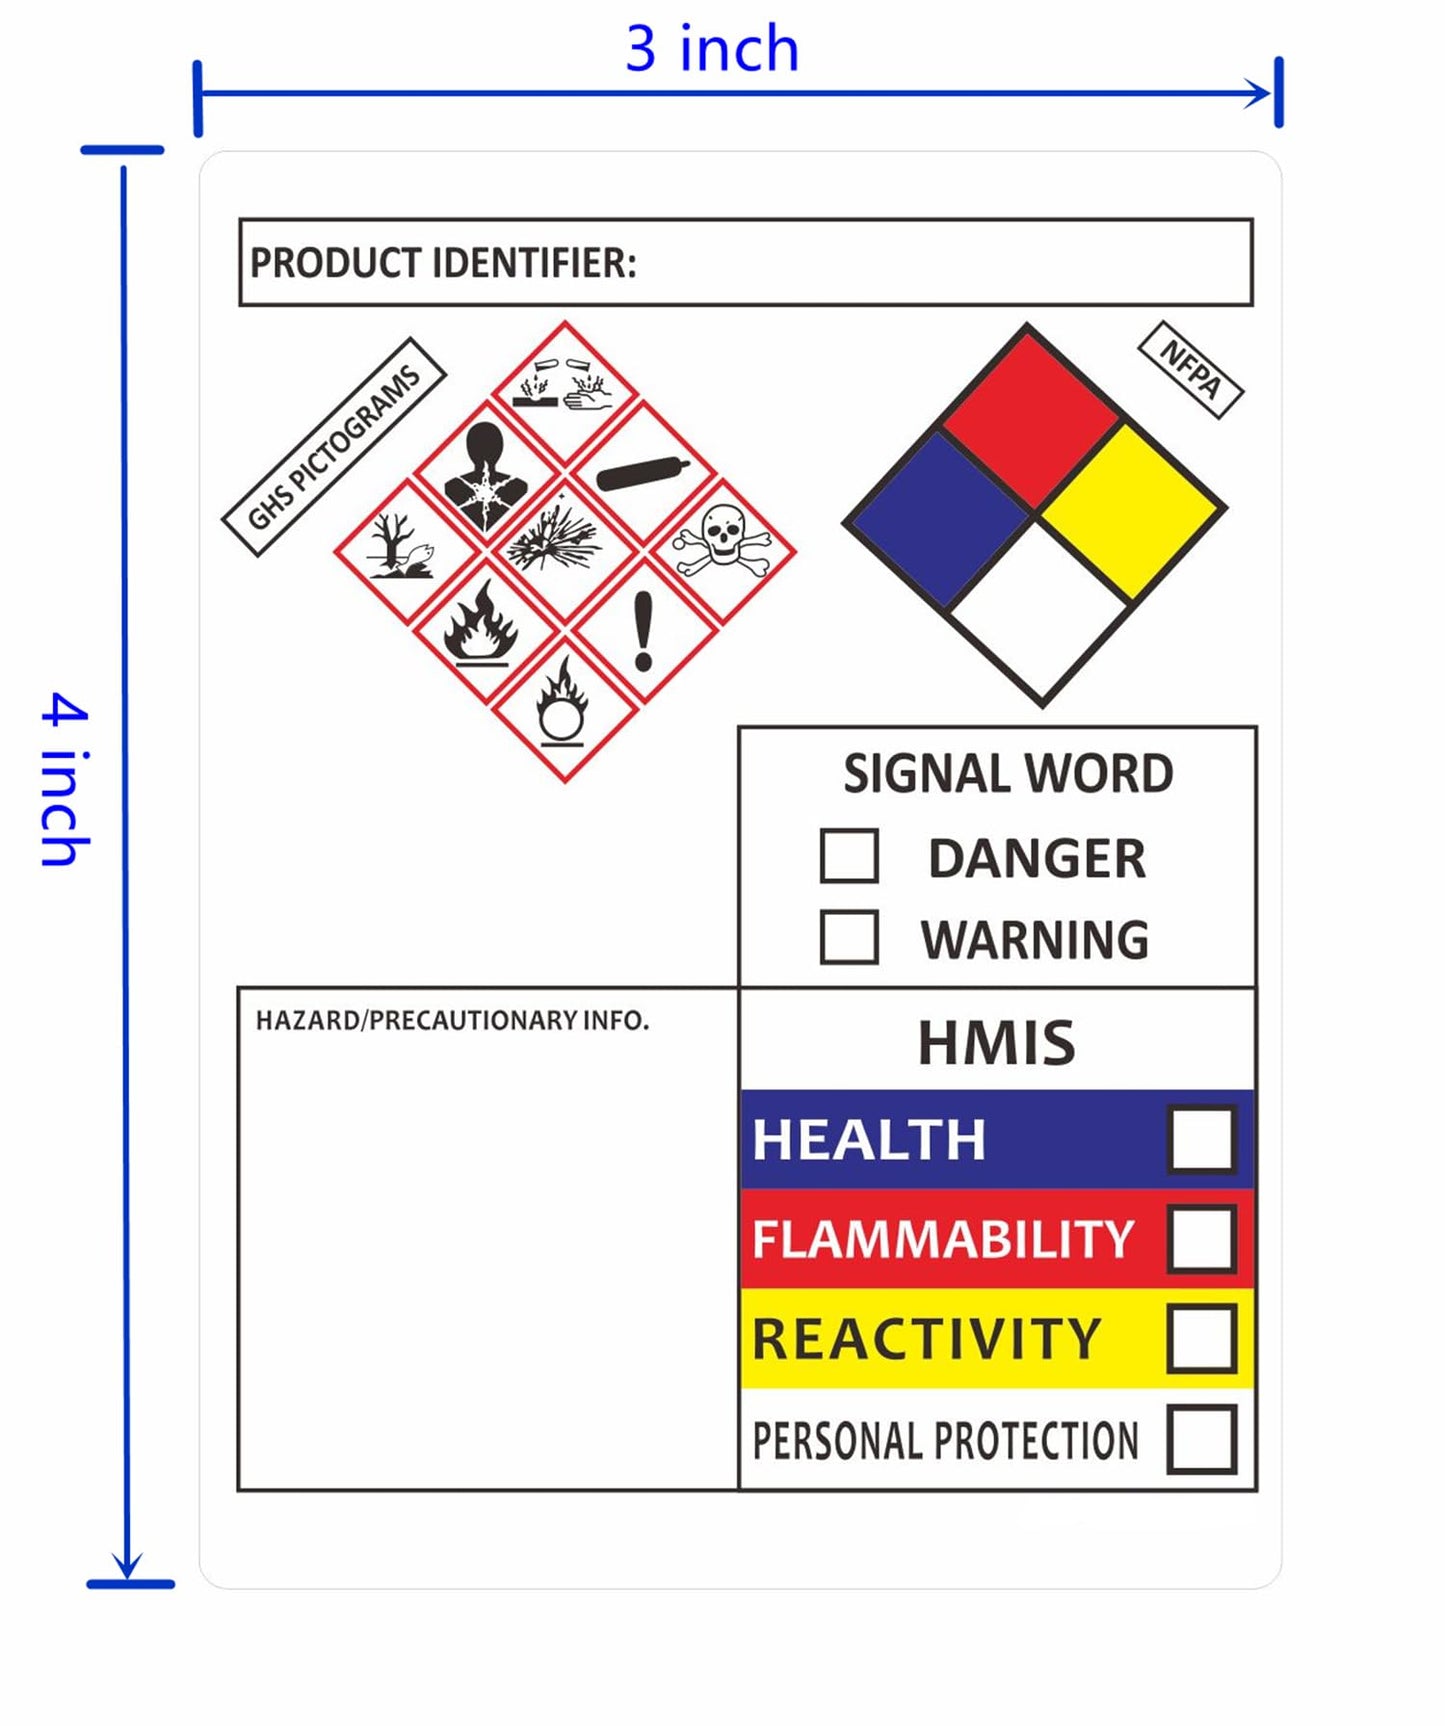 Hybsk SDS OSHA Labels for Chemical Safety Data 4 x 3 Inches | MSDS Stickers with GHS Pictograms | HMIS & Hazard Compliant Stickers 100 Labels per Roll